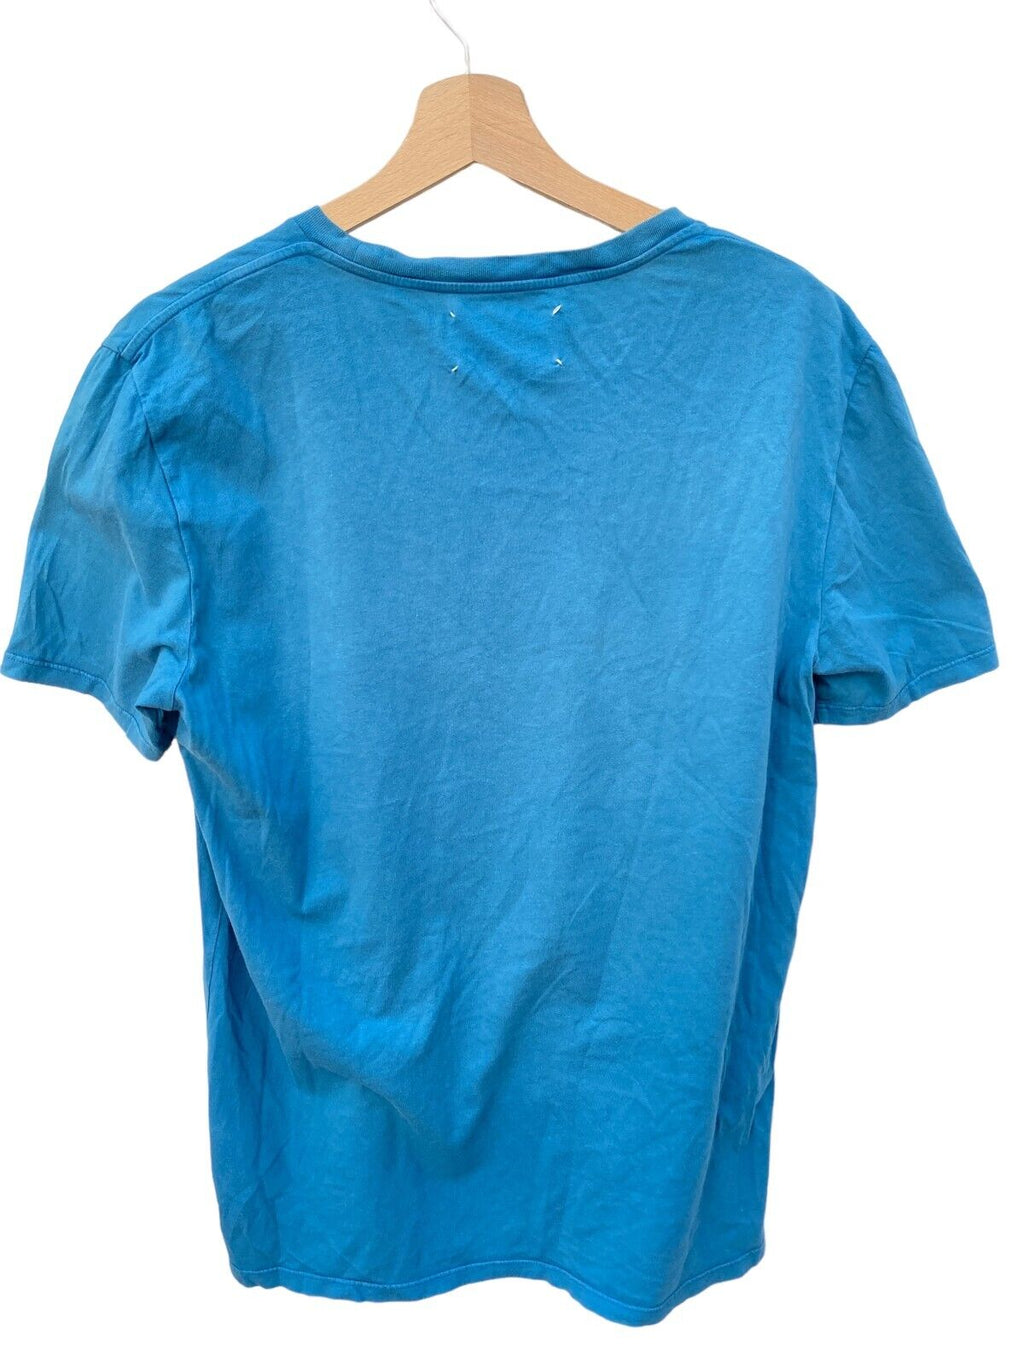 Blue T-shirt Size 48 / M   Good overall condition